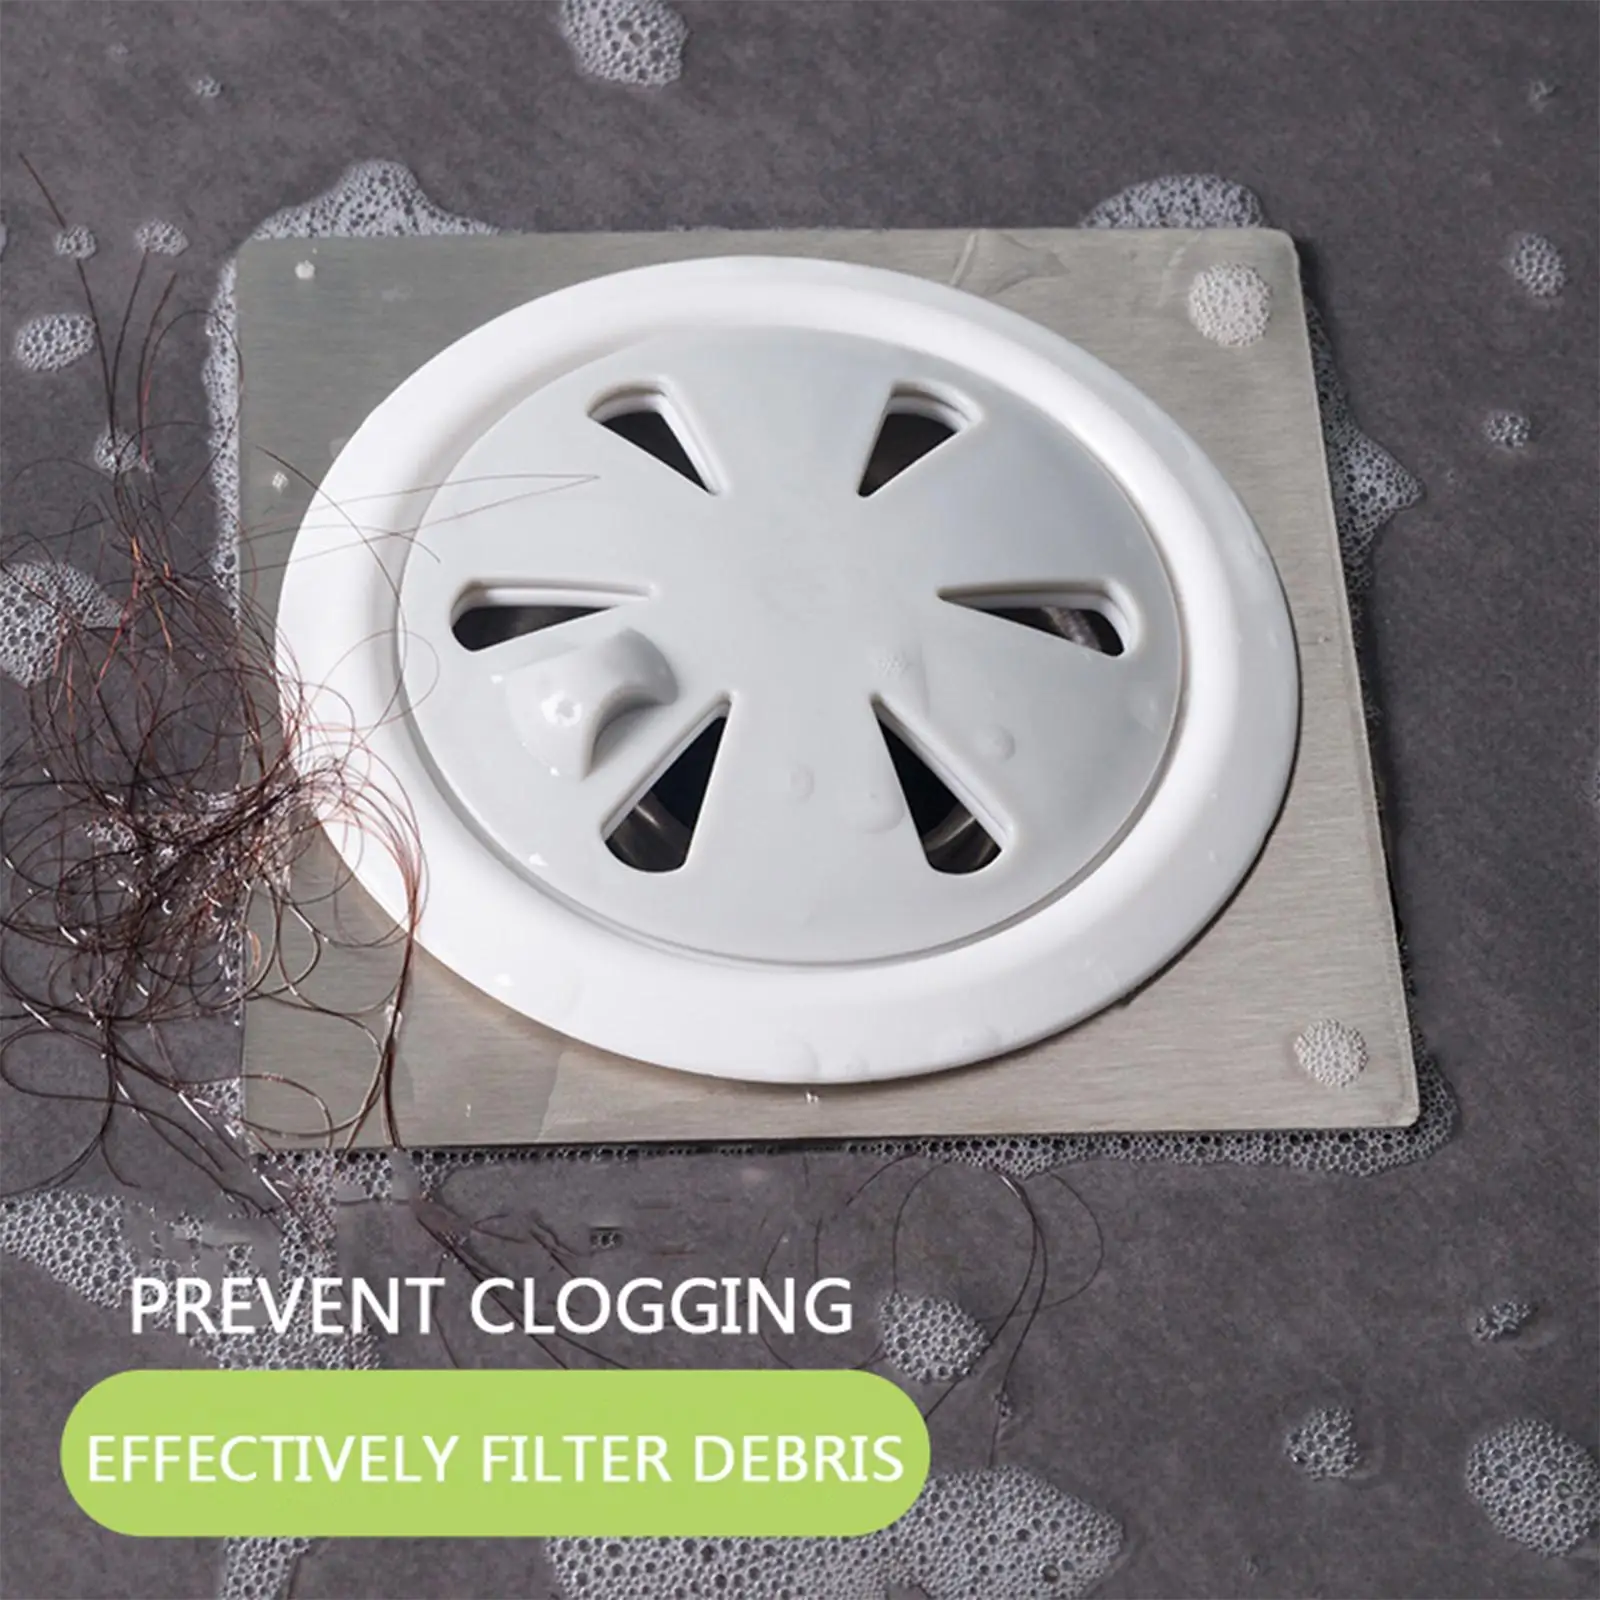 Durable Drain Catcher PP Round Shower Easy to Install and Clean Drain Covers Strainer Stopper Filter for Bathtub